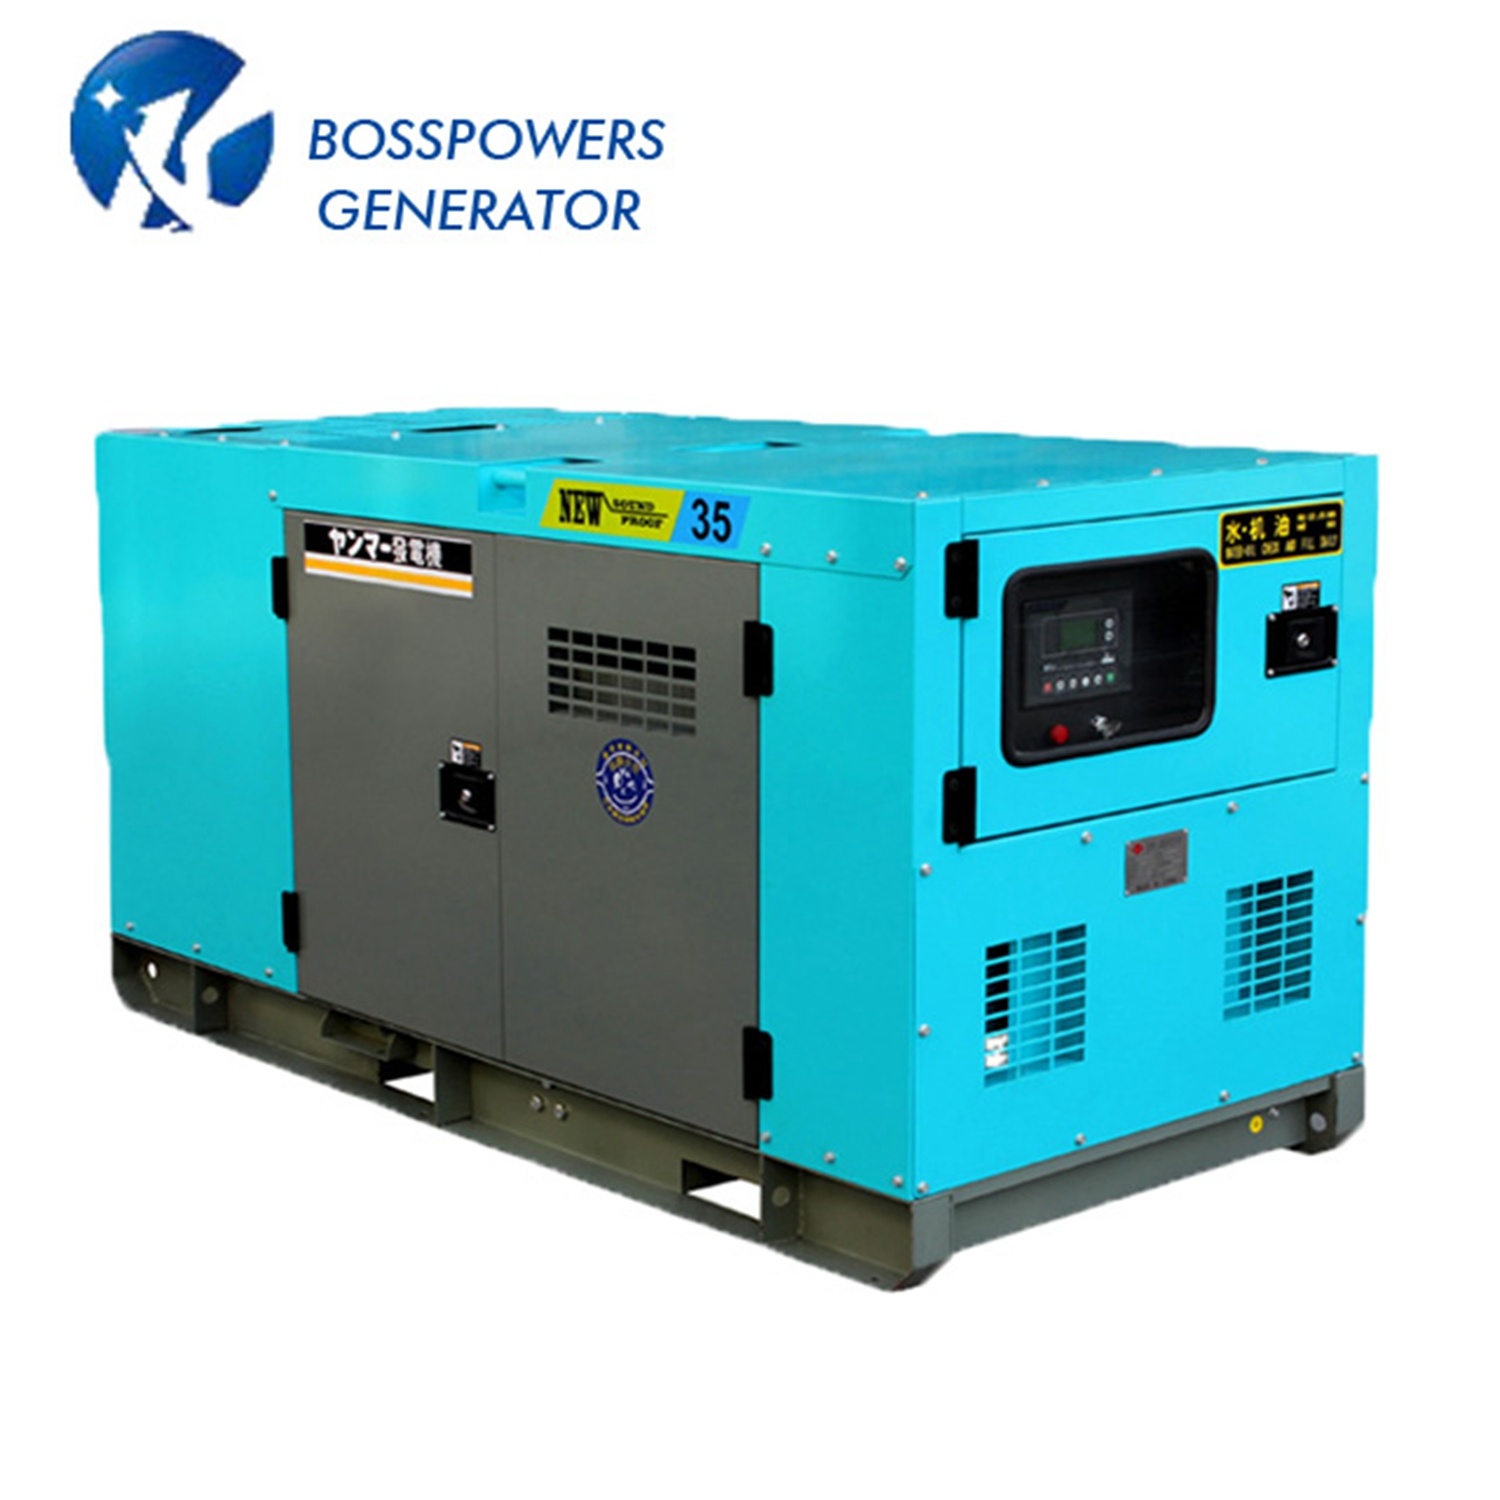 80kVA Diesel Generator Auto Start Electronic Governor Powered by 1104A-44tg2